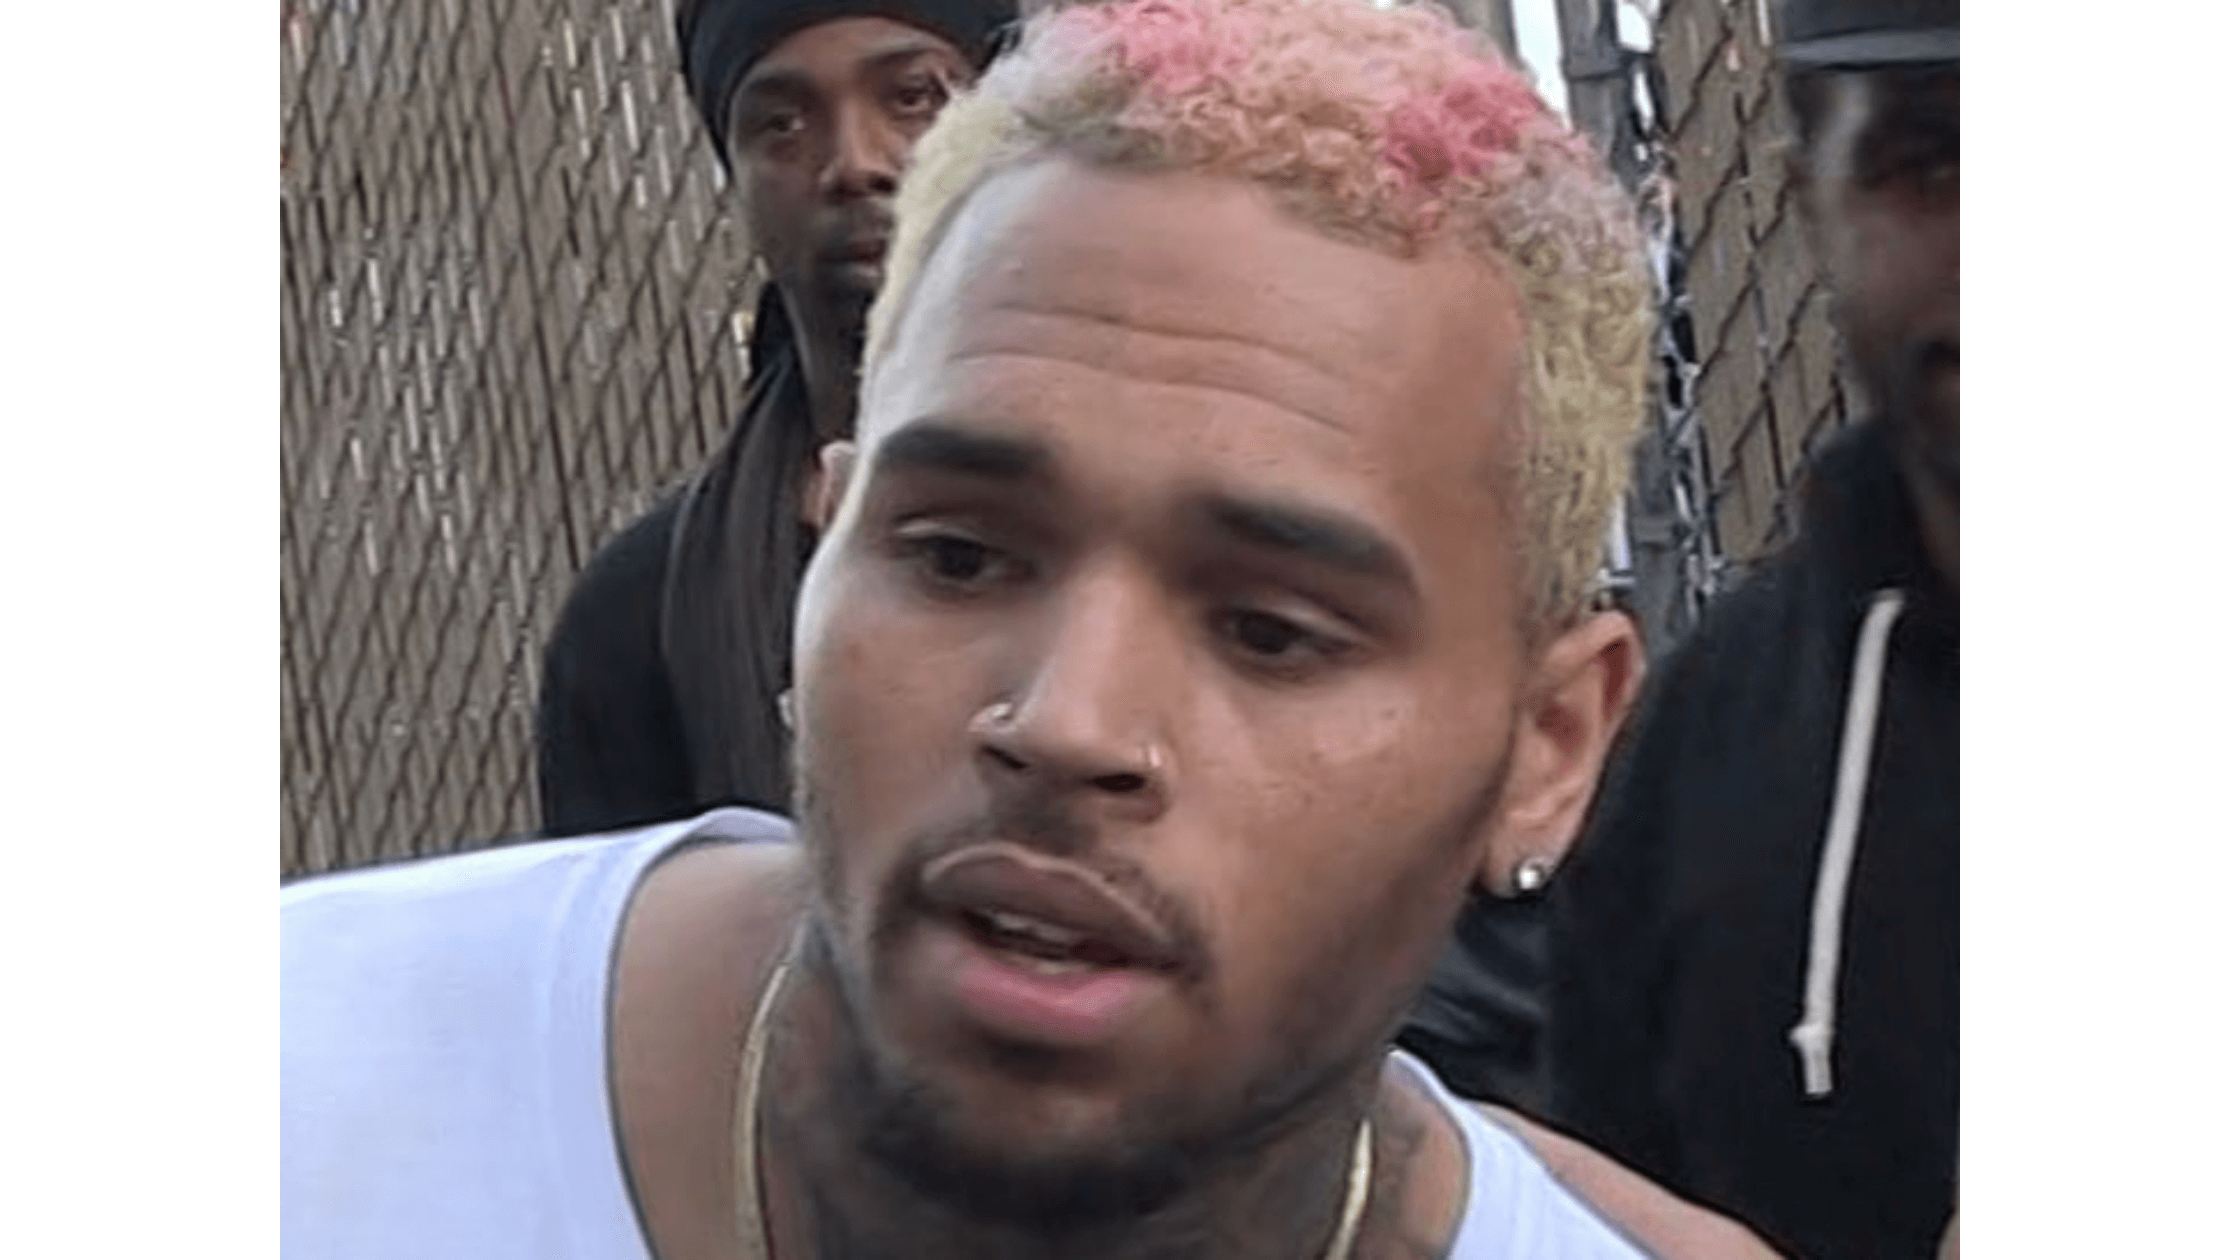 Housekeeper of Chris Brown sues him: Claims malicious dog attack on her